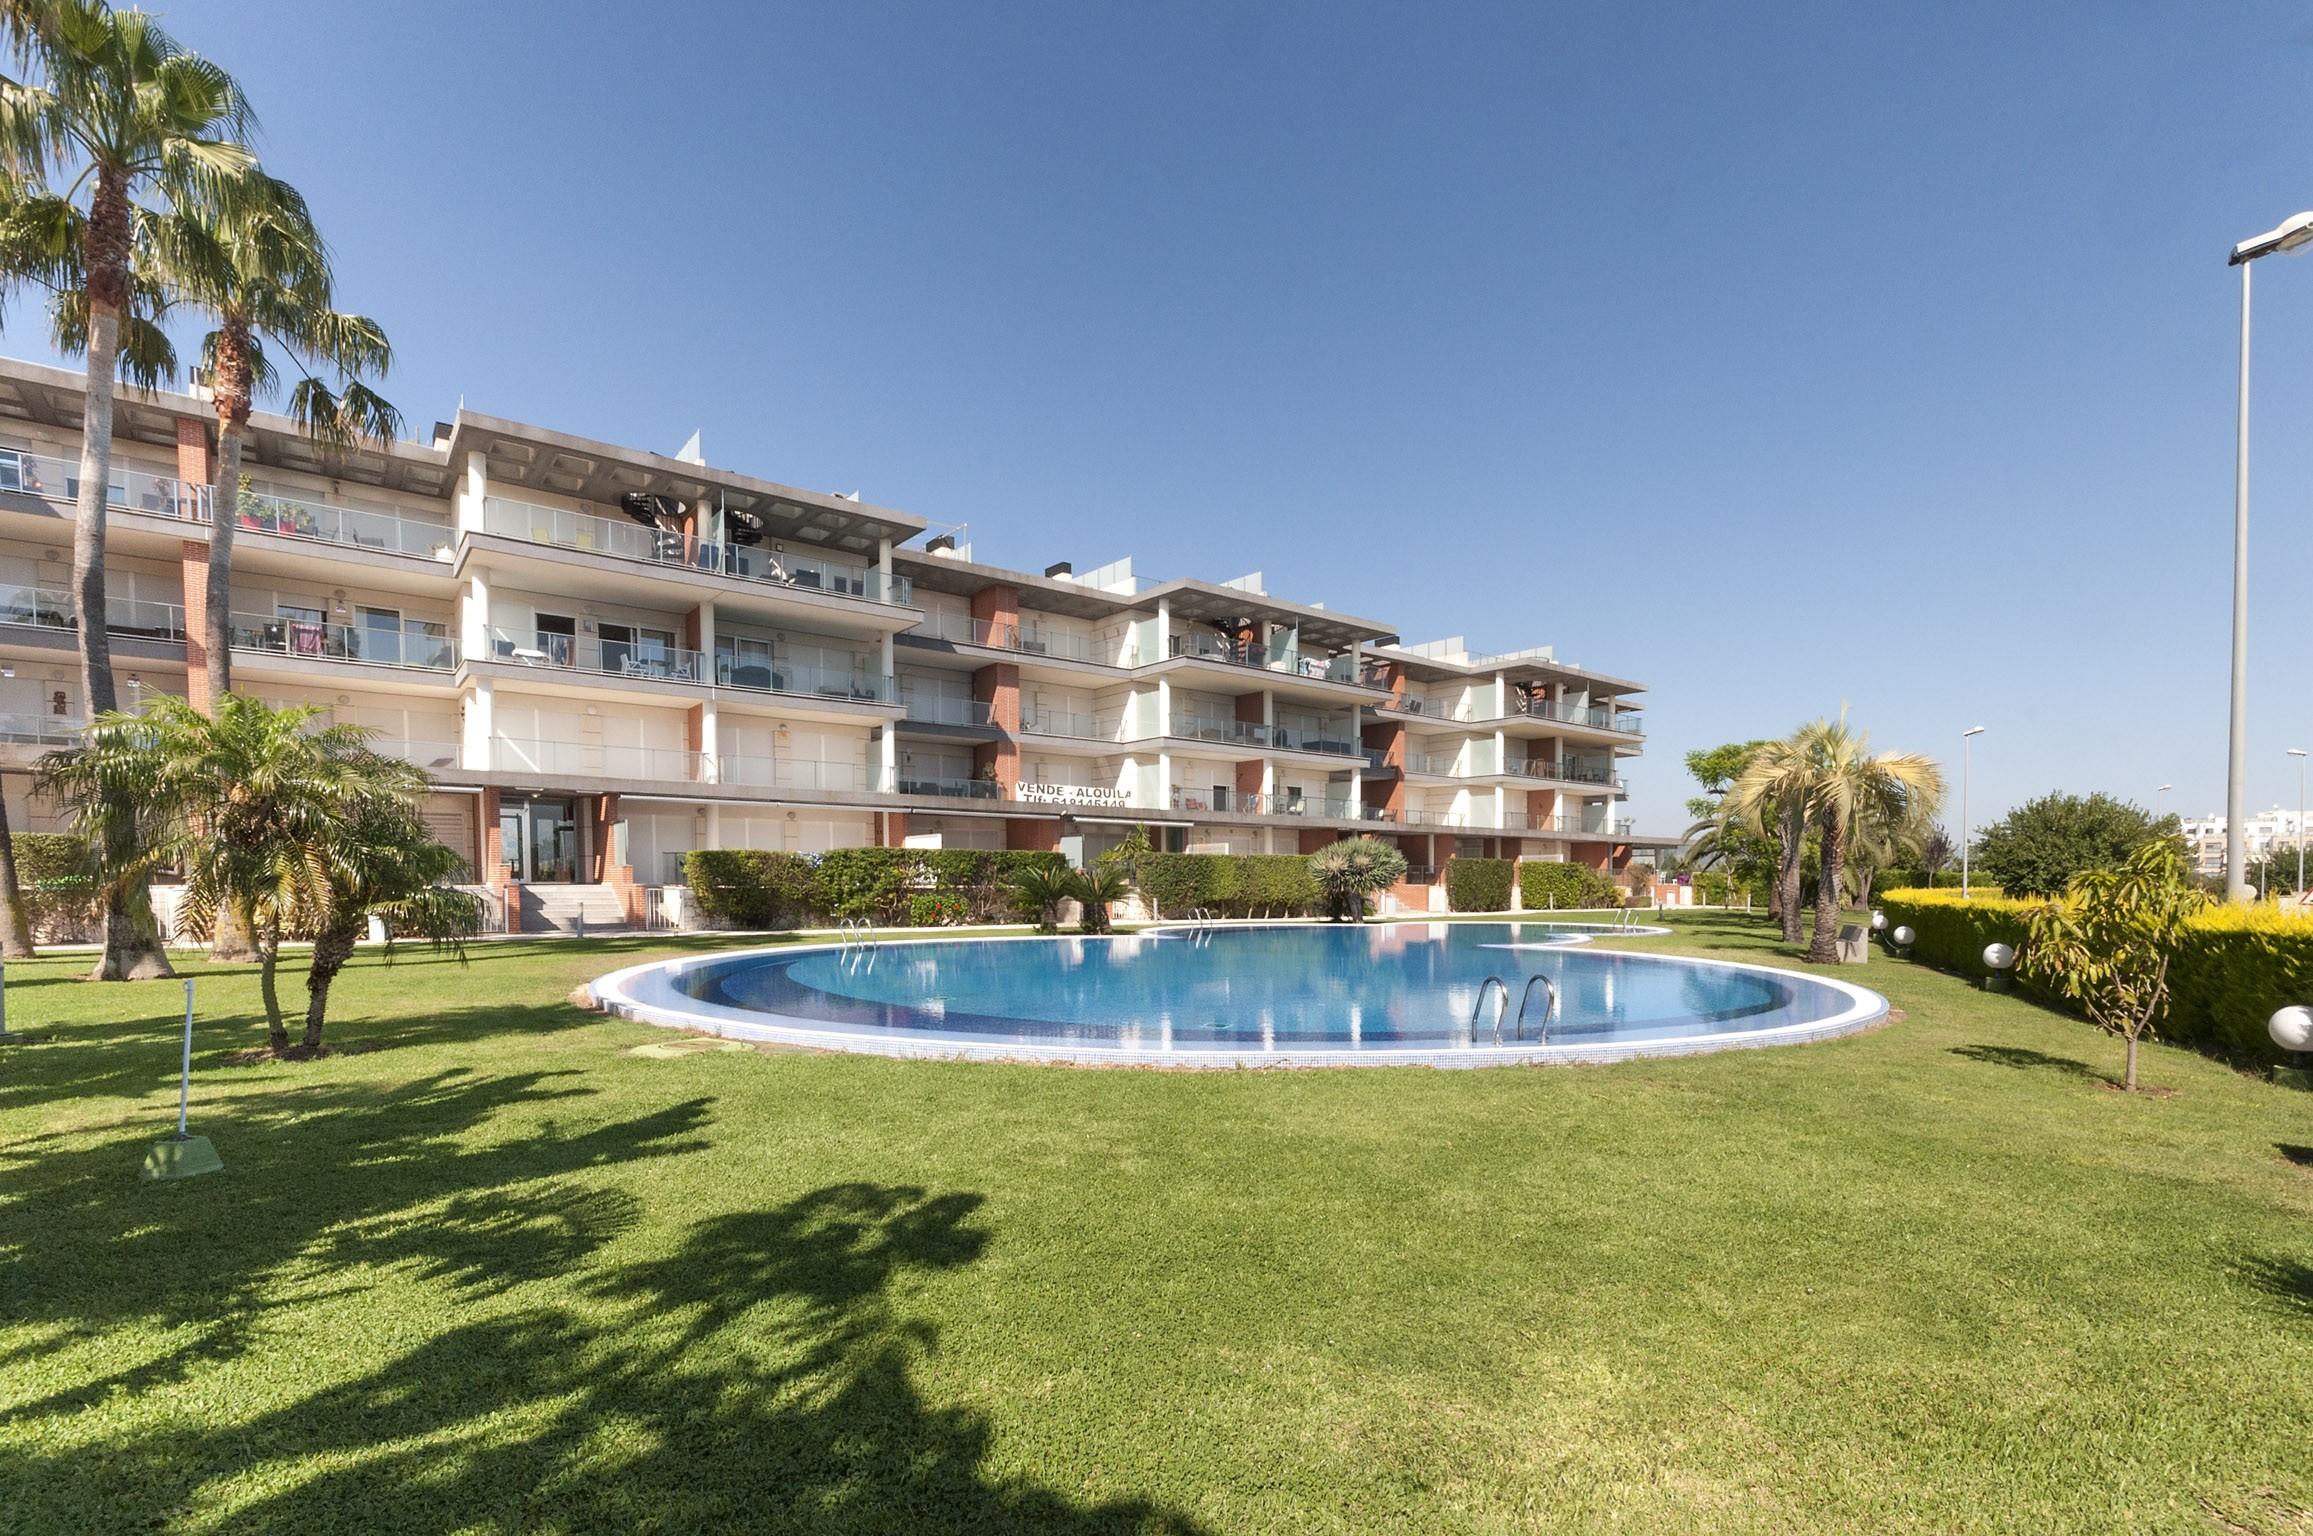 Property Image 1 - AIRE - Apartment with shared pool in Oliva Nova. Free WiFi